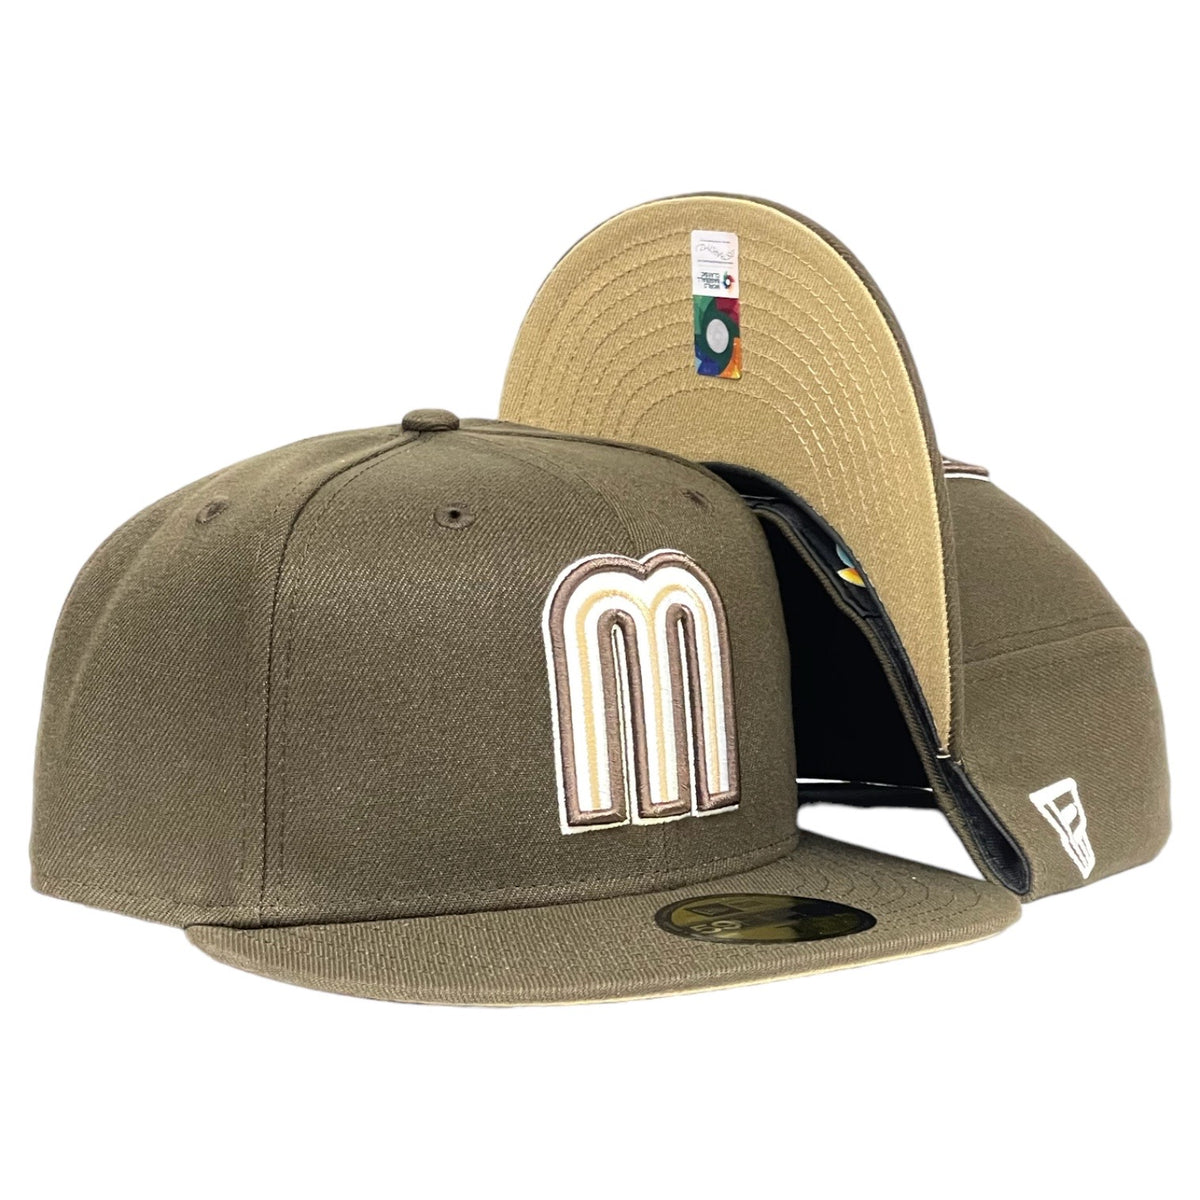 Mexico WBC Fitted New Era 59Fifty Stone Brown Hat Cap Copper UV